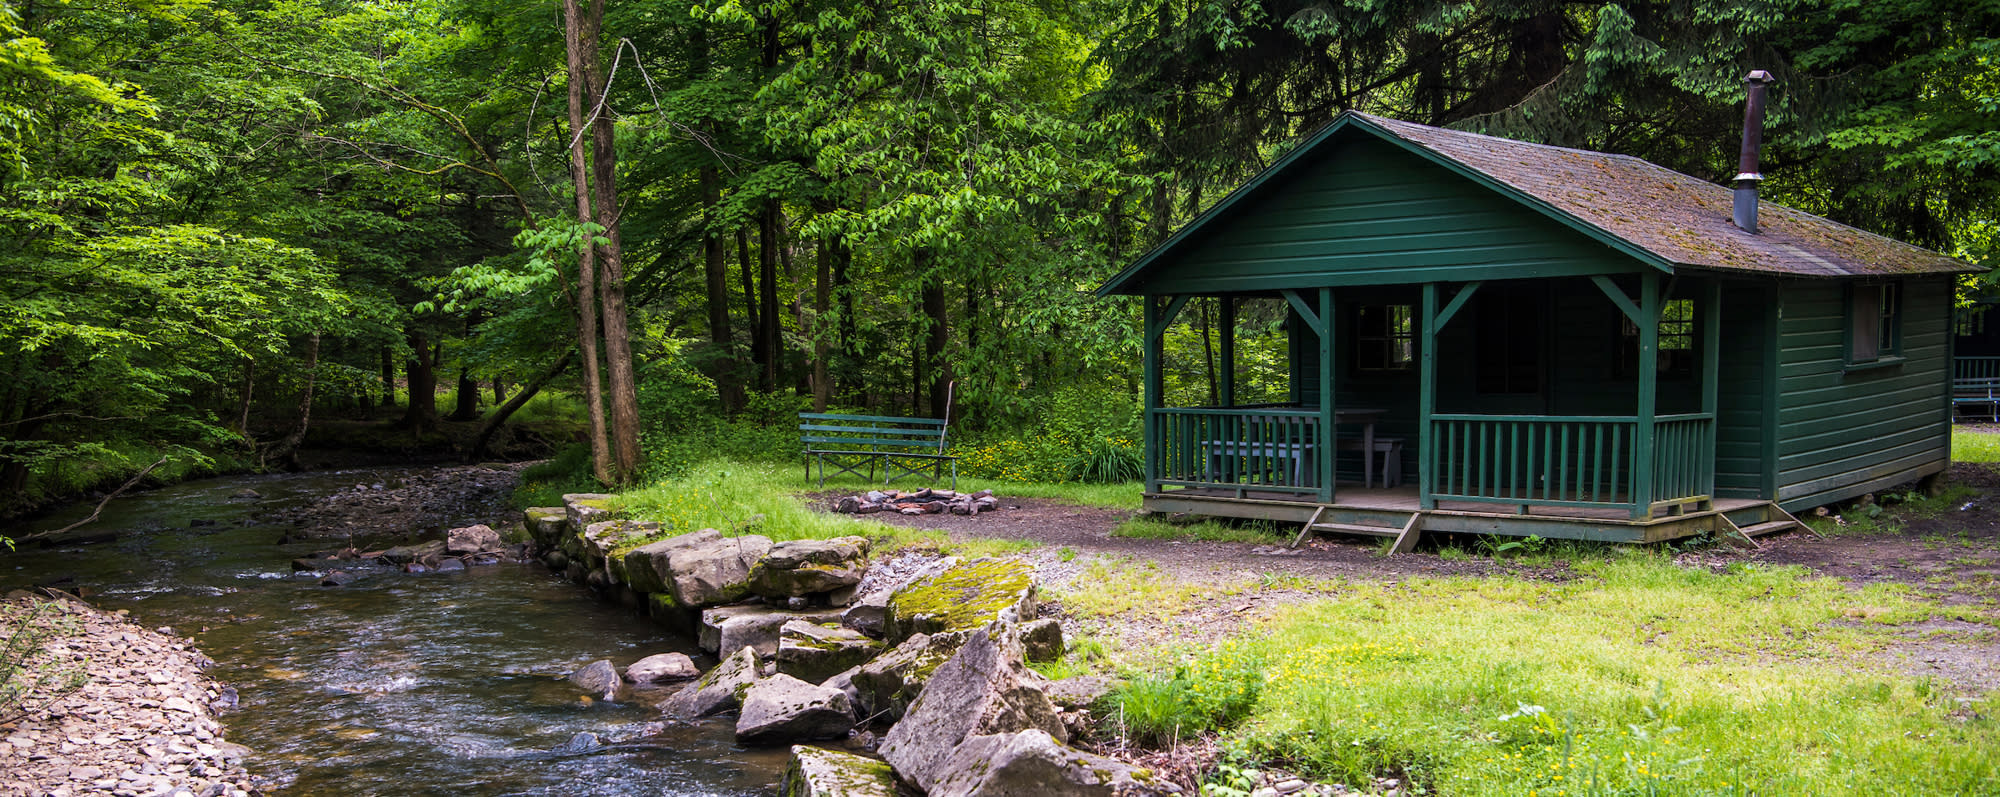 A photo of the exterior of a green cabin at Allegheny State Park